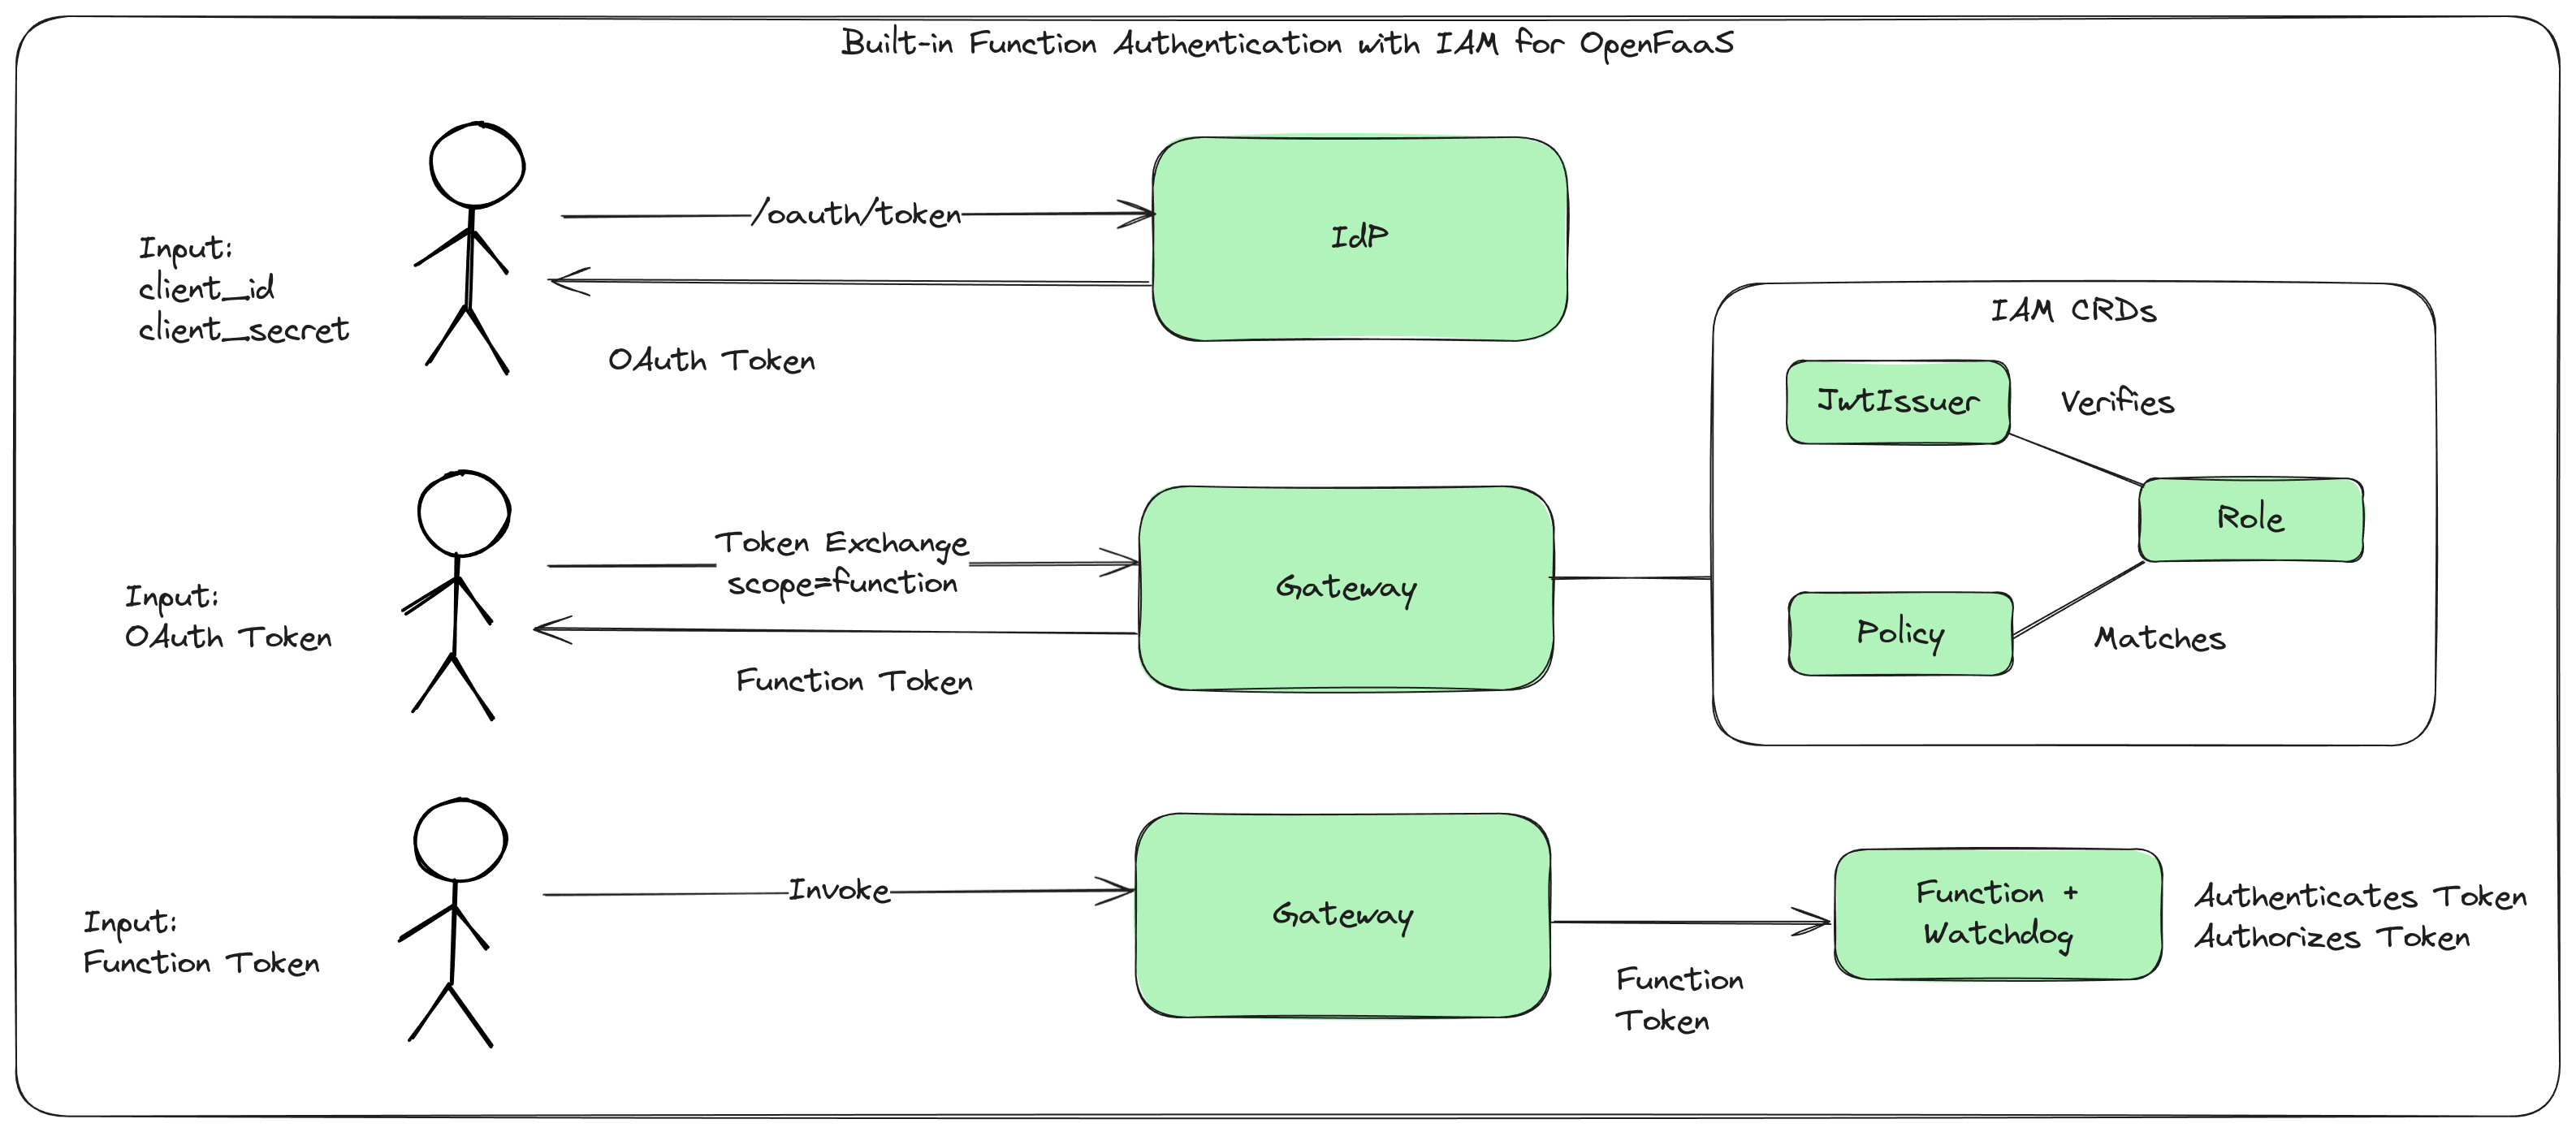 Function authentication flow from IdP to function invocation